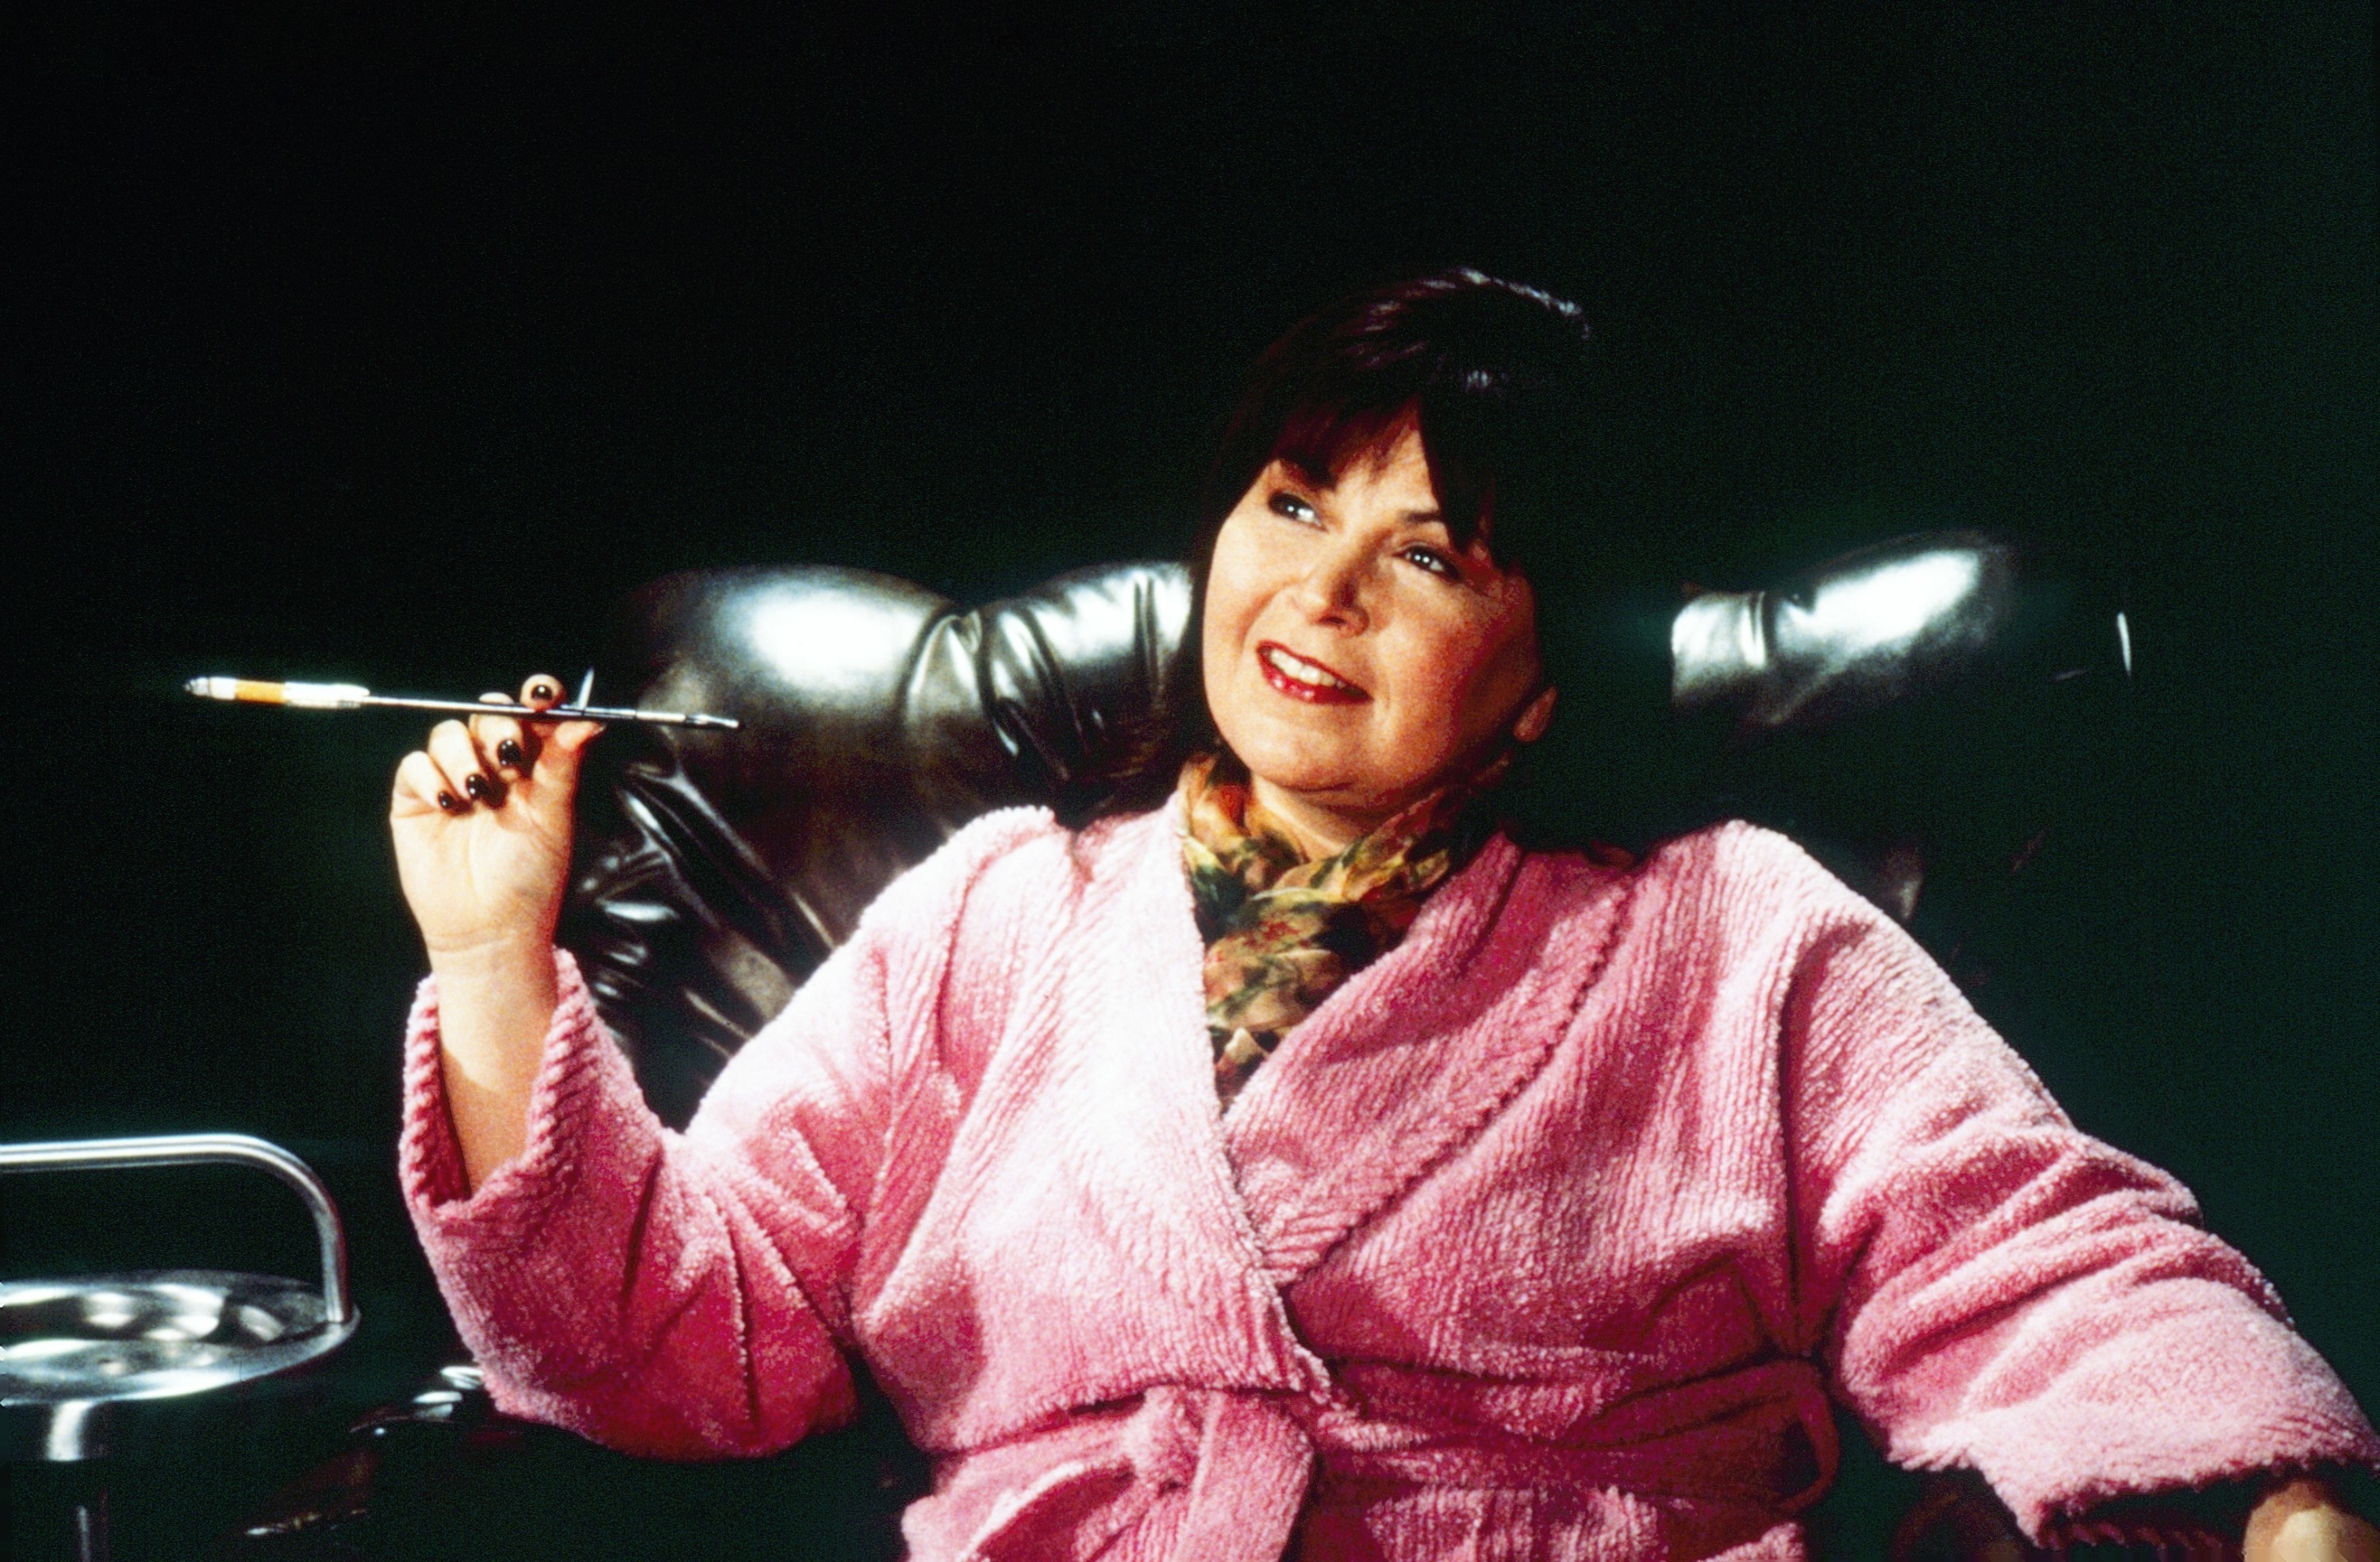 Roseanne in the show sitting on a leather chair